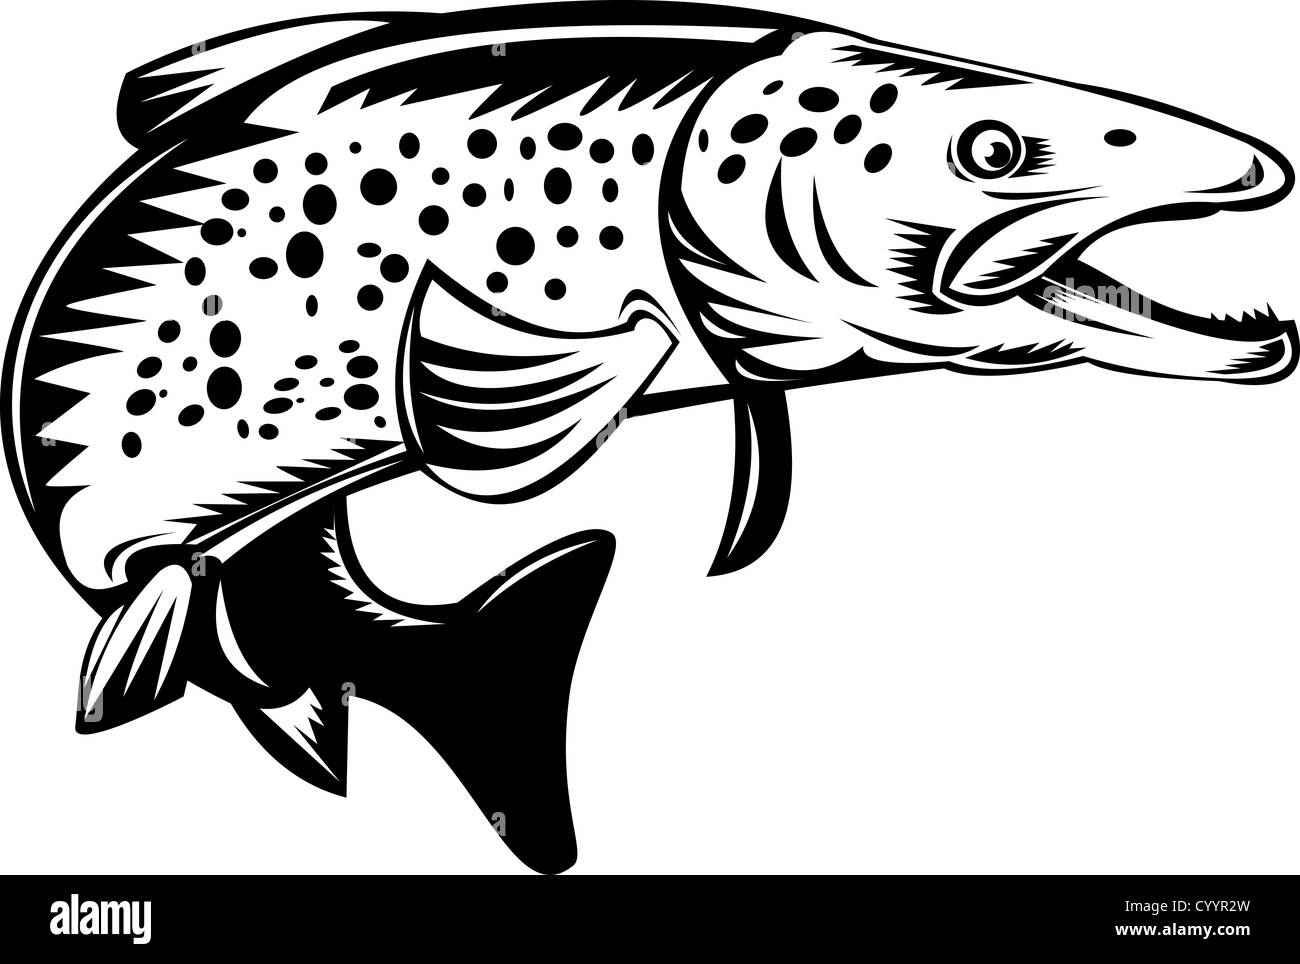 Spotted trout Black and White Stock Photos & Images - Alamy